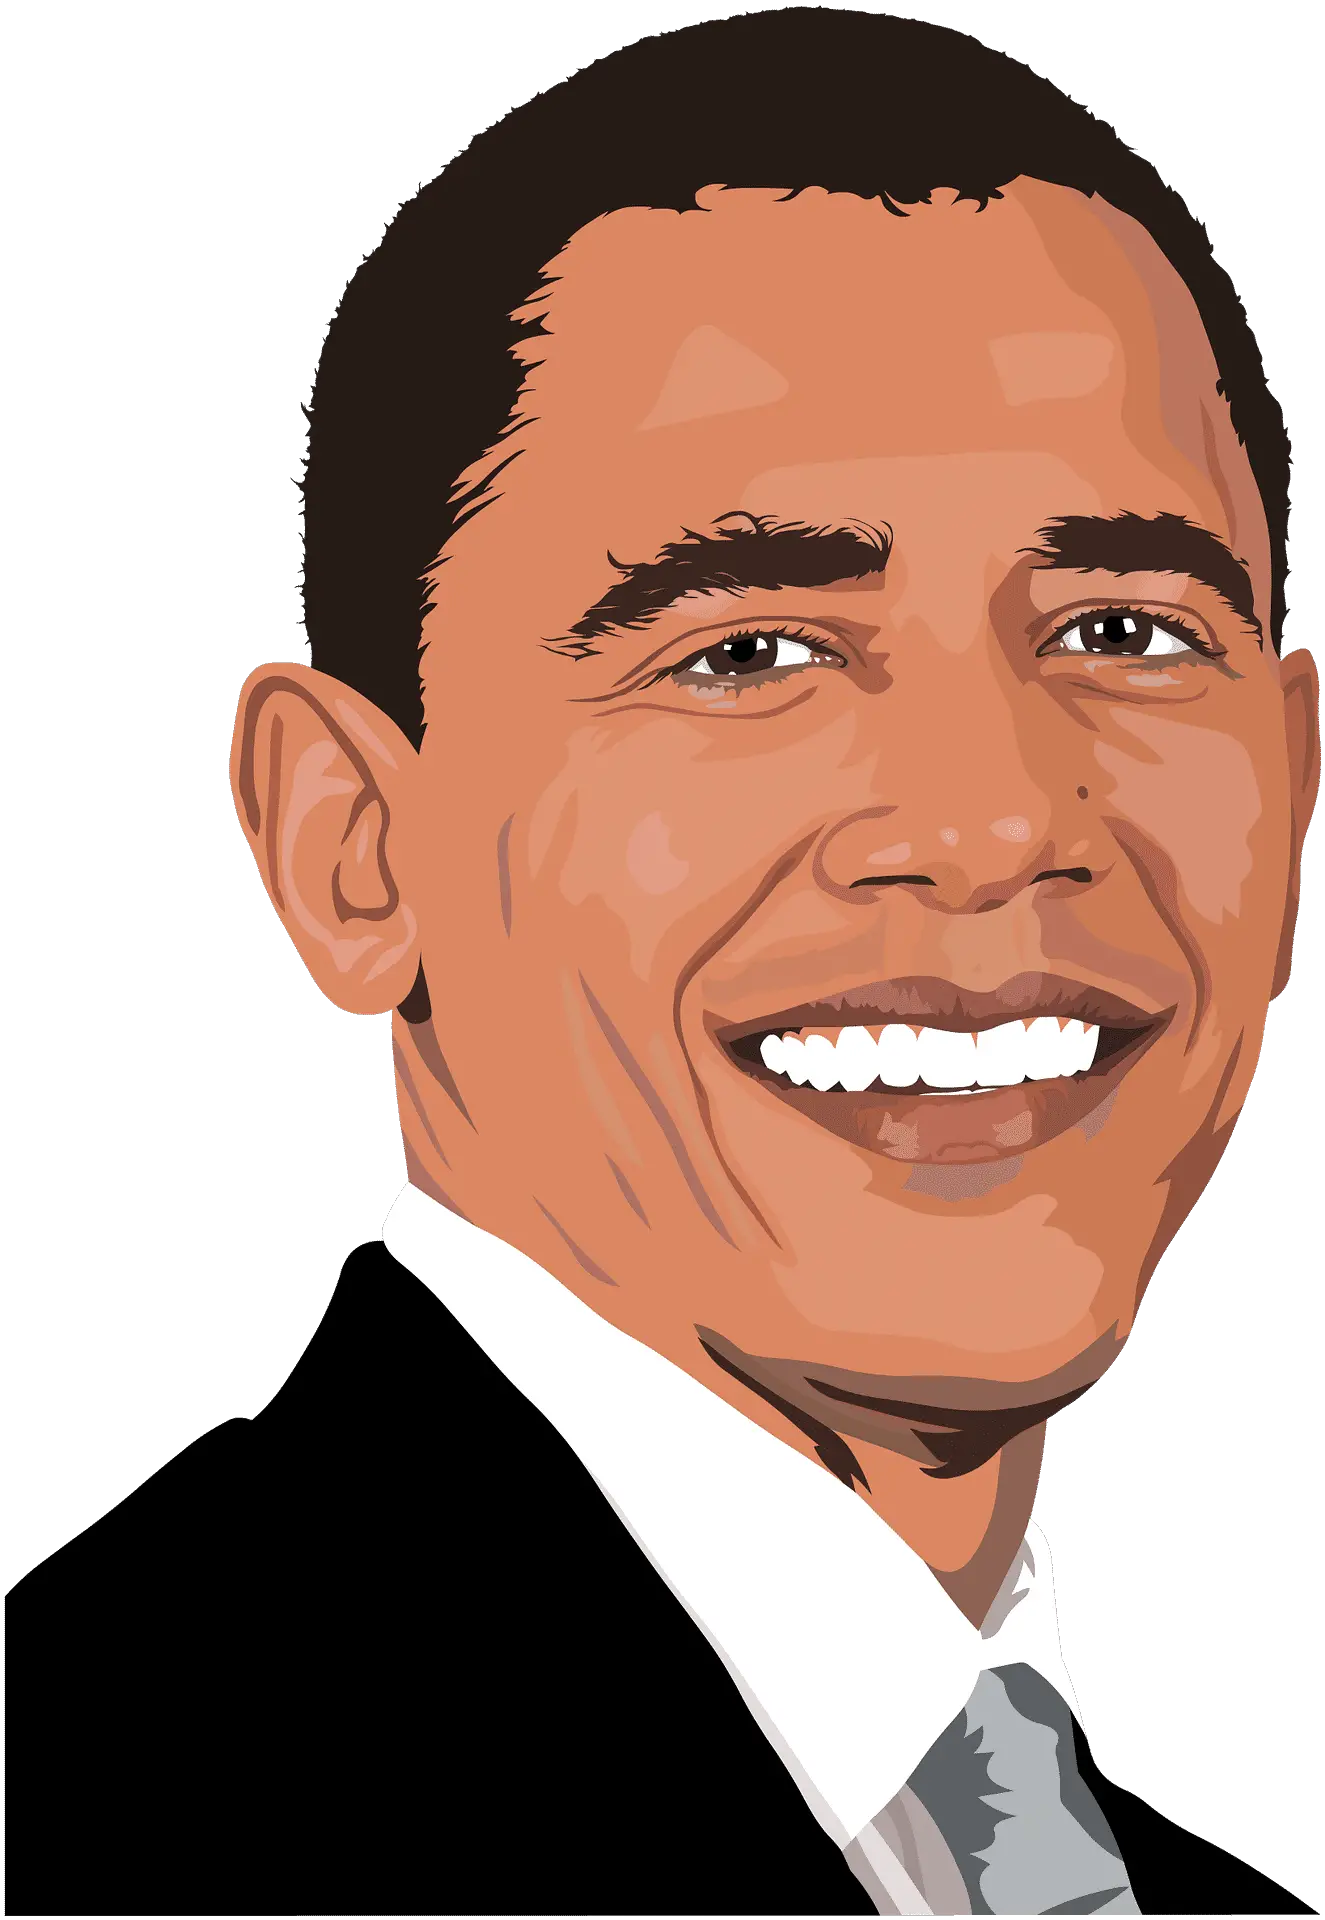 50 Powerful Quotes by Barack Obama